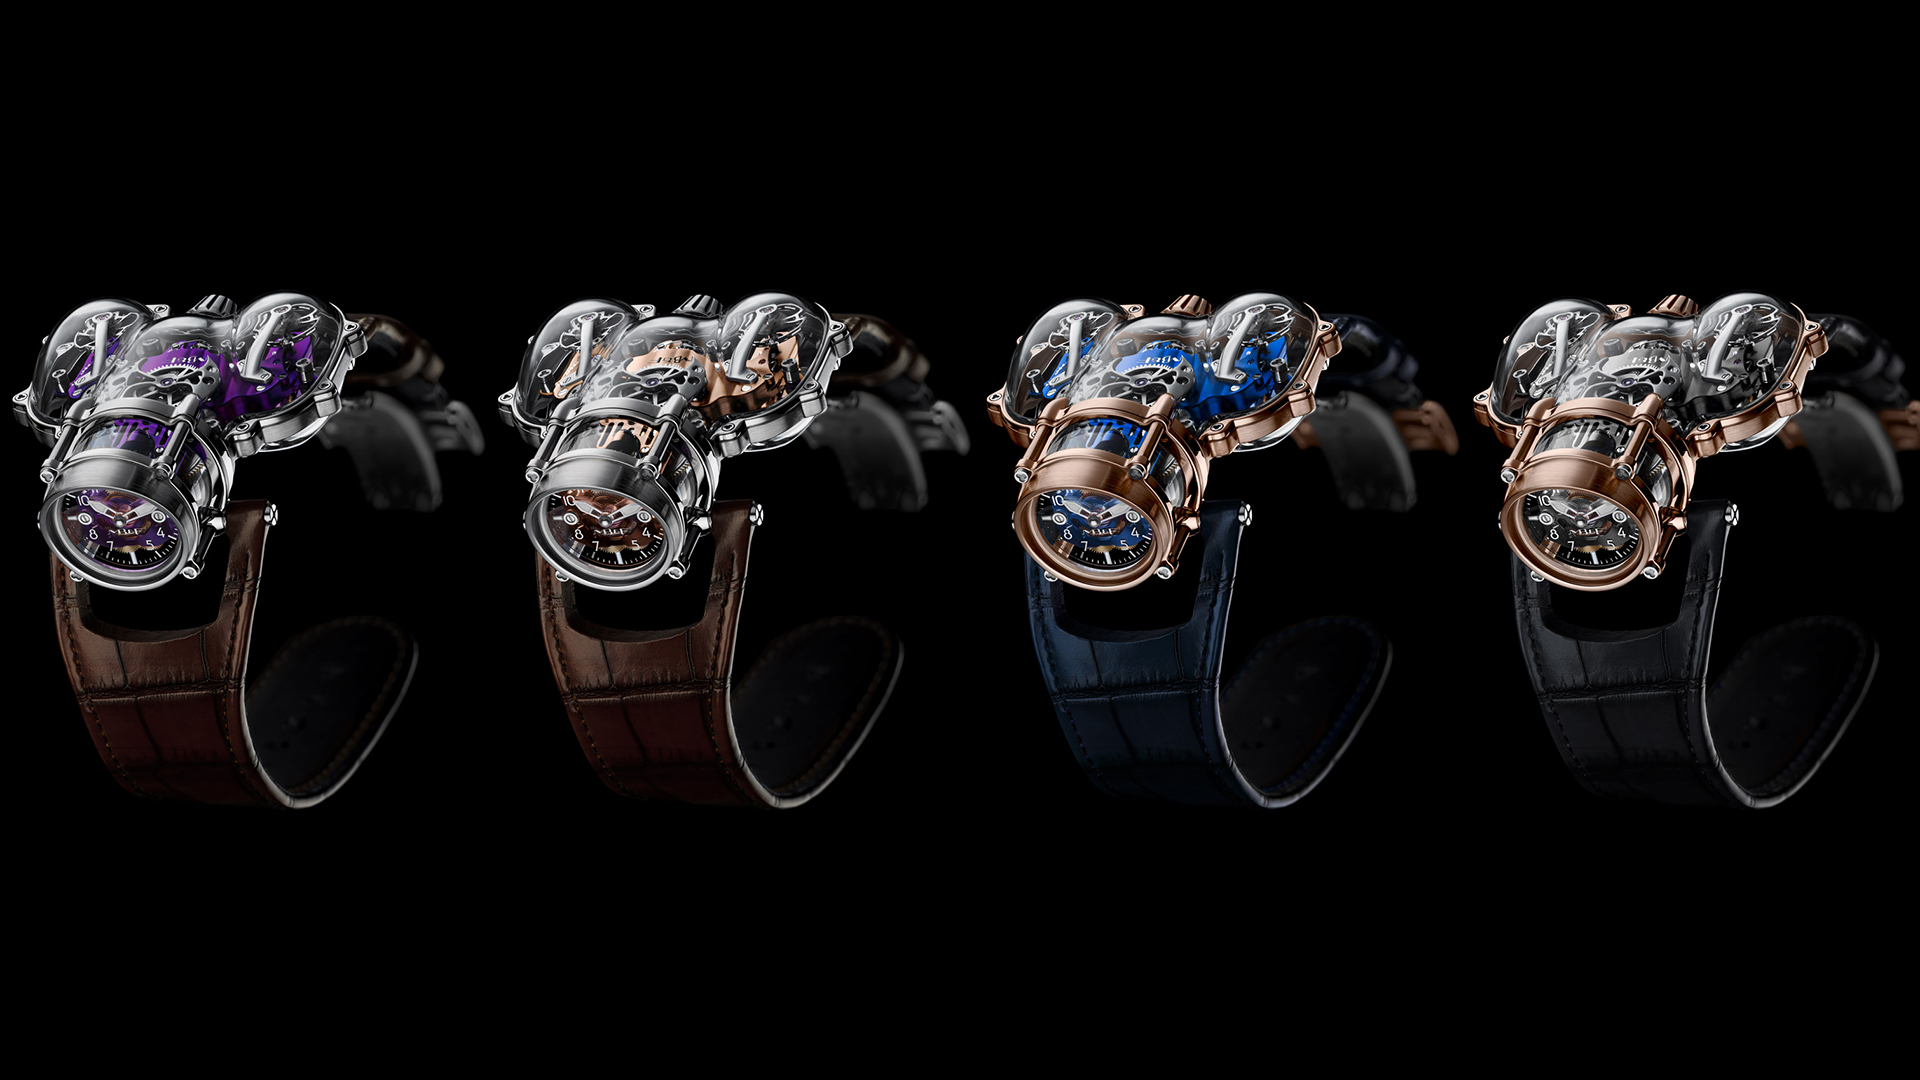 MB&F Announces Limited Edition HM9-SV Watch Series